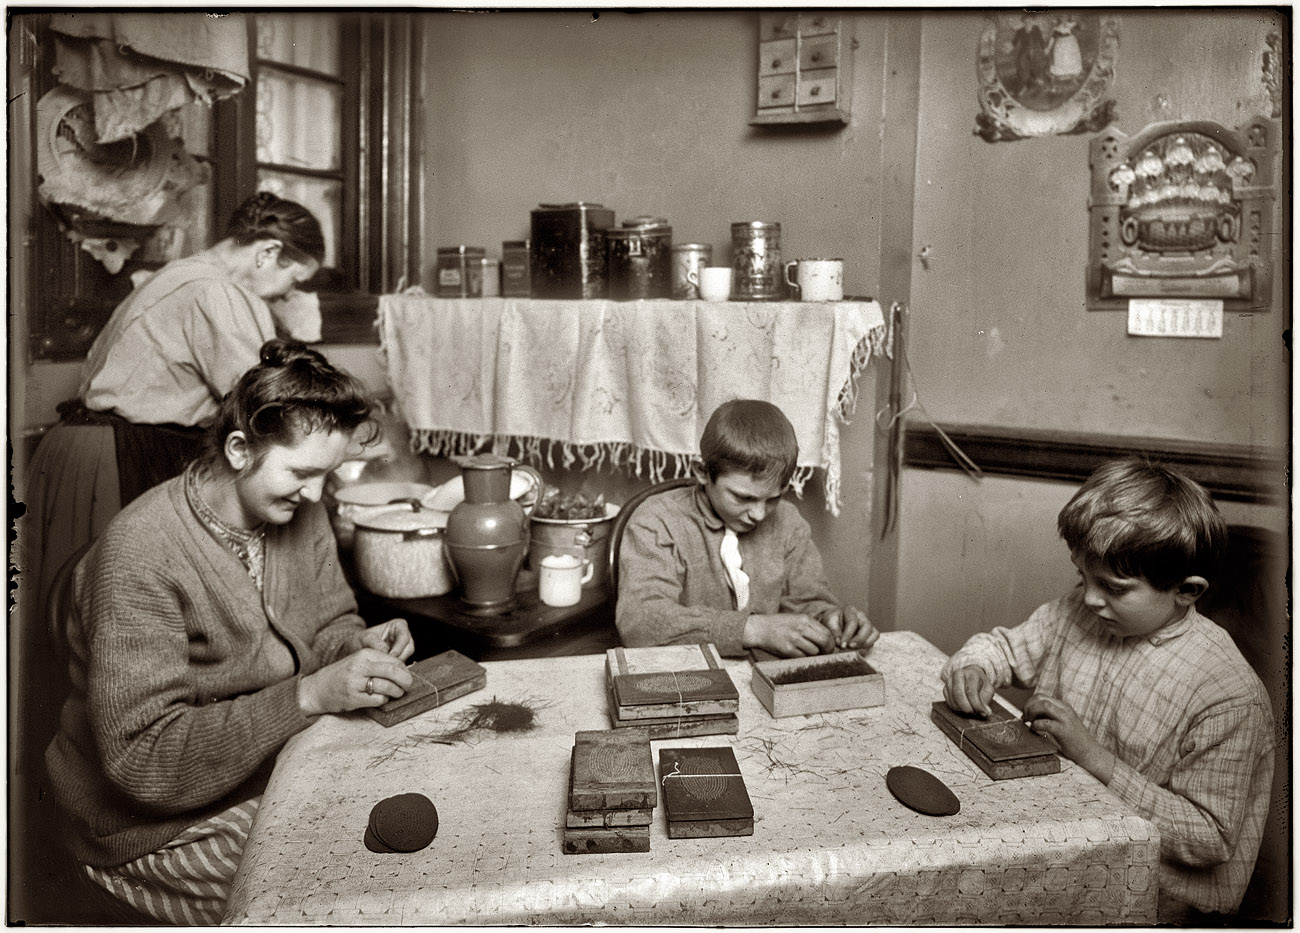 6 p.m., January 31, 1912. "Making hair-brushes. Hausner family, 310 East 71st Street, New York. Frank is 6 years old and John is 12. The mother had a sore throat and wore a great rag wrapped around it, but she took it off for the photo. They said they all (including the 6 yr old) worked until 10 p.m. when busy. Their neighbor corroborated this. She said, 'It's a whole lot better for the boys than doin' nothin'.' The mother said the night work hurts their eyes and John said so too. He was not very enthusiastic about the beauties of work. All together, they make about $2 a week. Father is a motorman." Photo and caption by Lewis Wickes Hine. View full size.